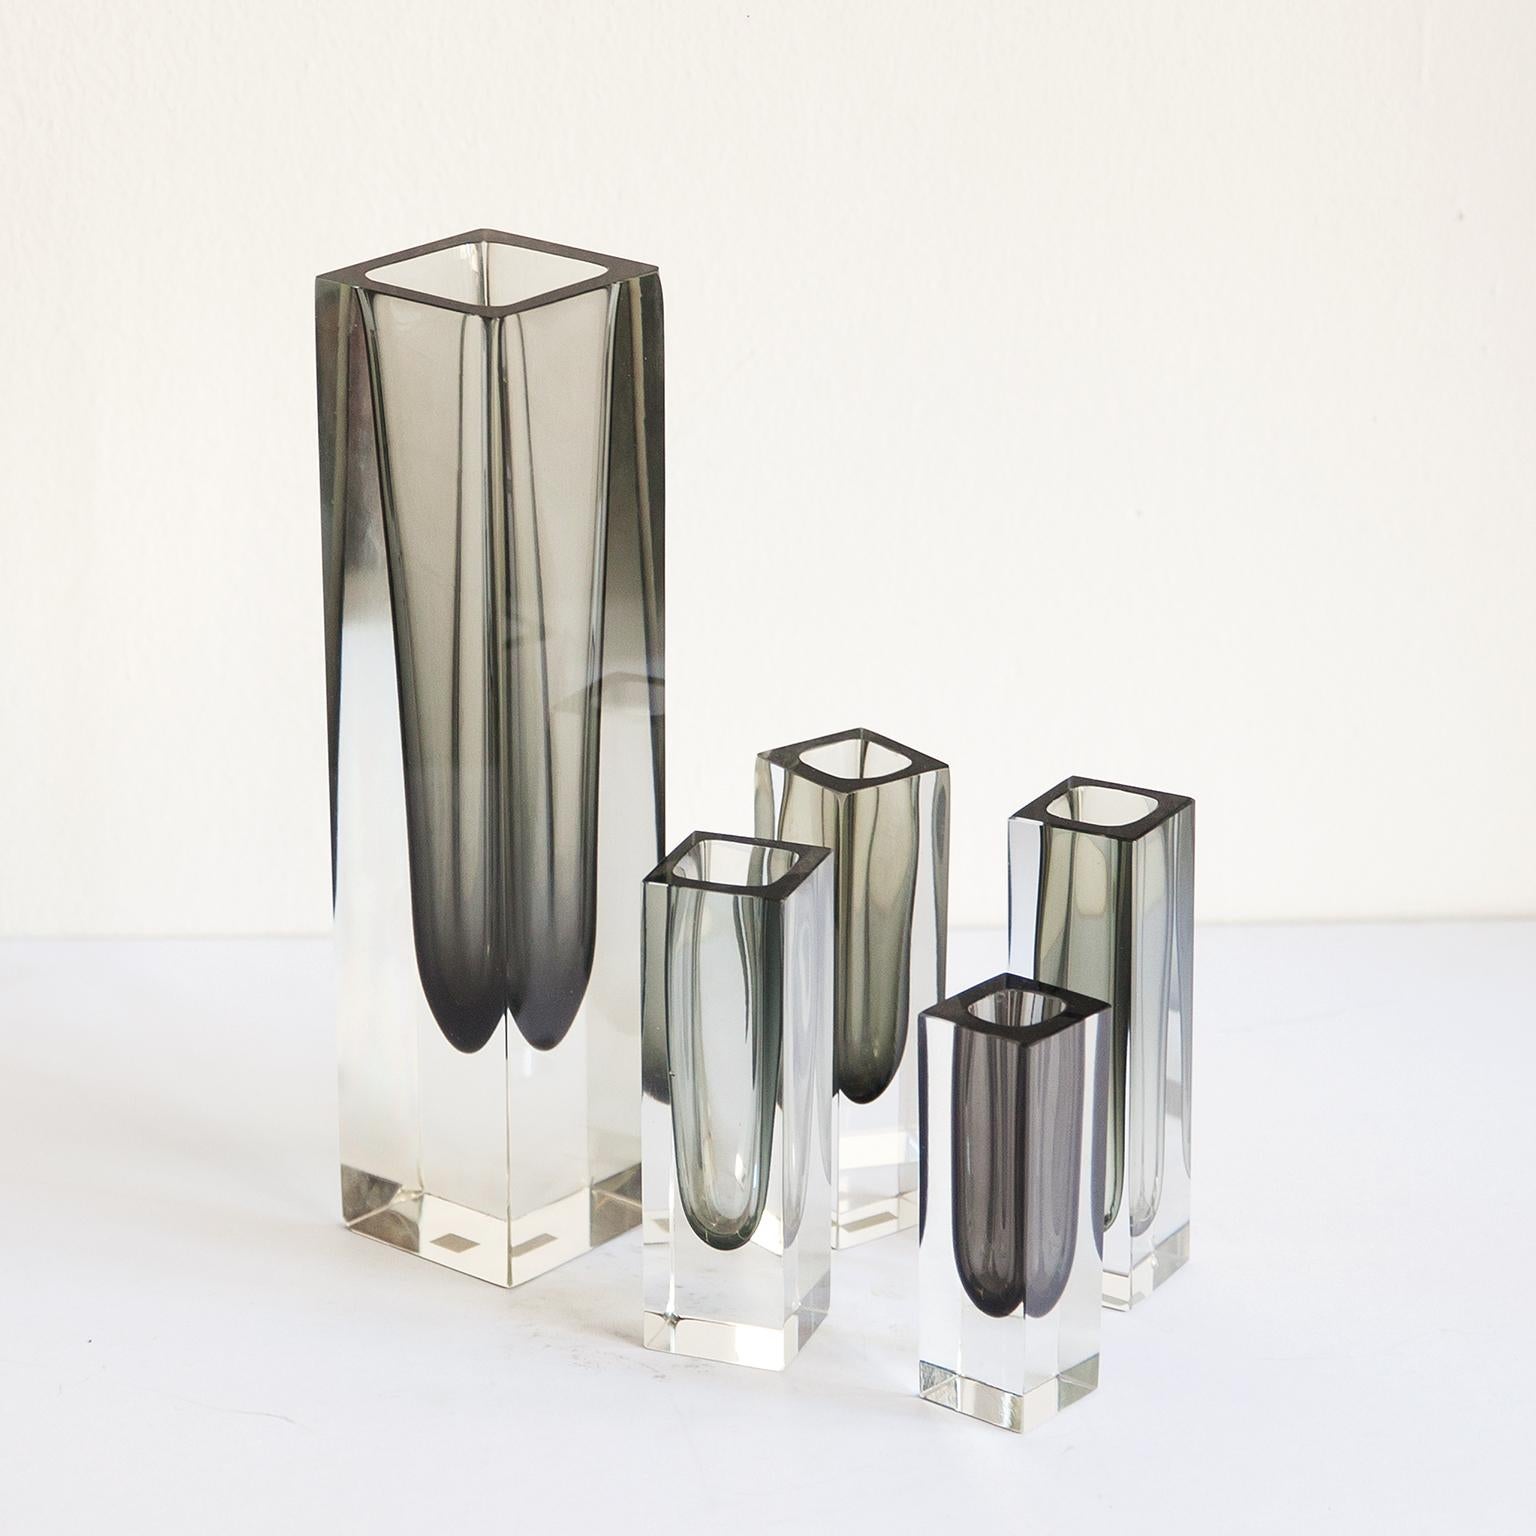 Wonderful set of Sommerso Murano Glass Vases attributed to Flavio Poli.

The heights are 30, 15, 12 cm and the diameter from 7,5-5 cm.